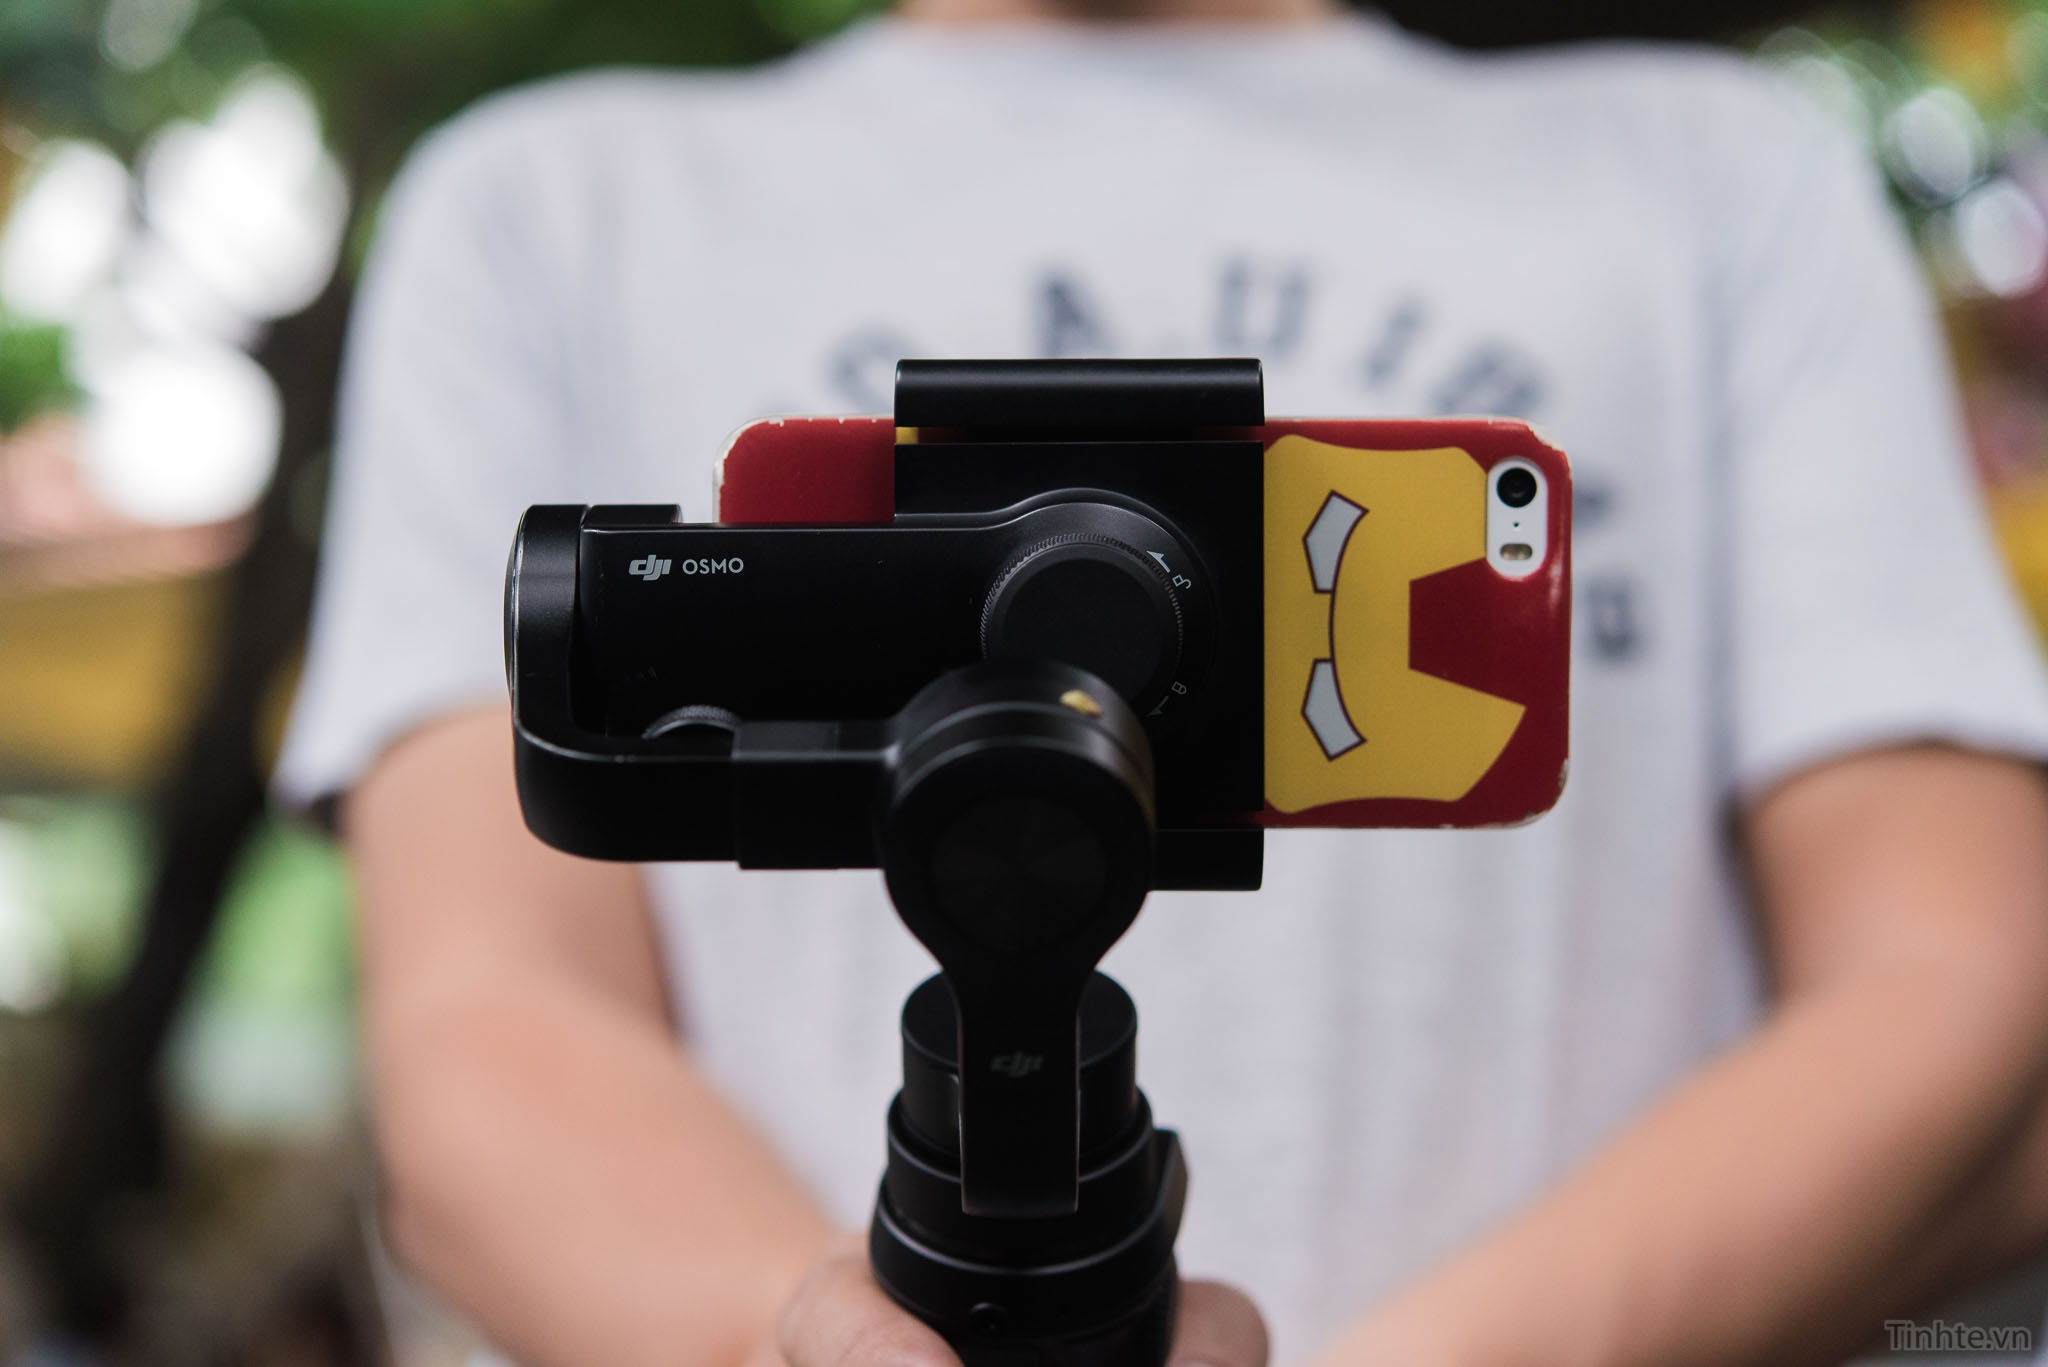 Danh_Gia_review_Osmo_mobile_Aibird_uoplay_gimbal_tinhte.vn-5.jpg